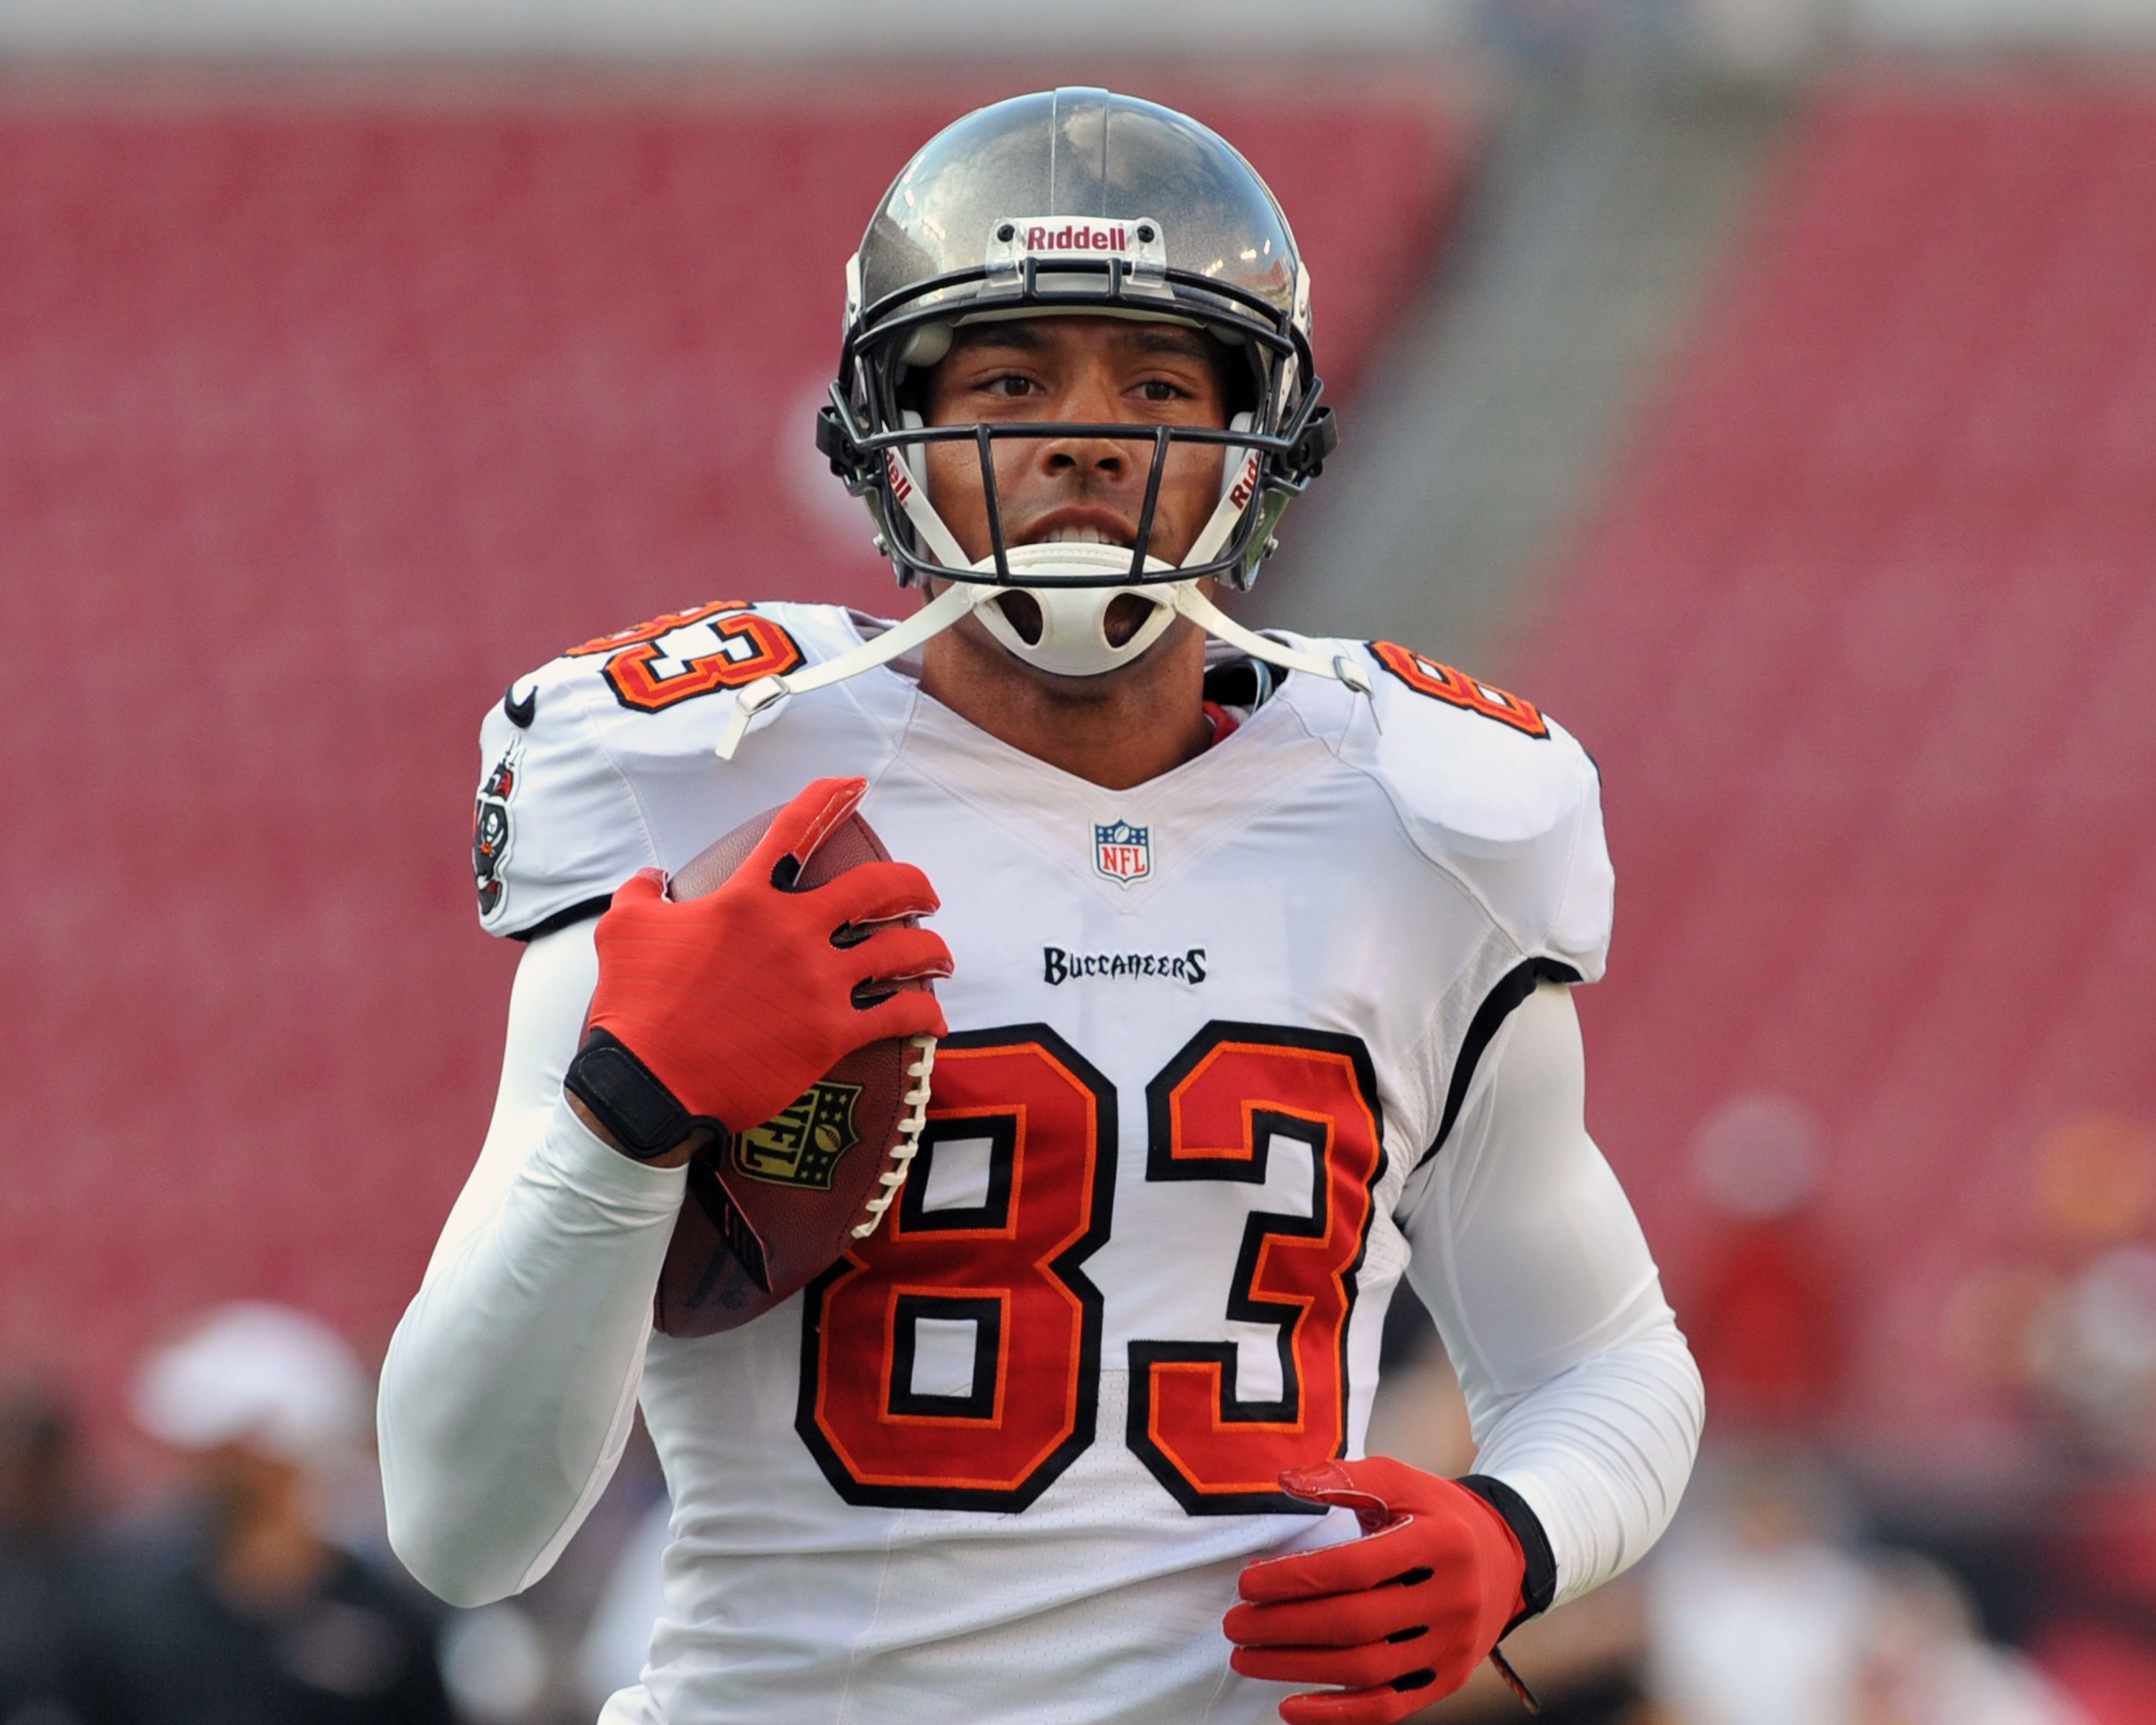 Vincent Jackson of the Tampa Bay Buccaneers warms up for a game against the Washington Redskins on August 29, 2013.  | Photo:Getty Images